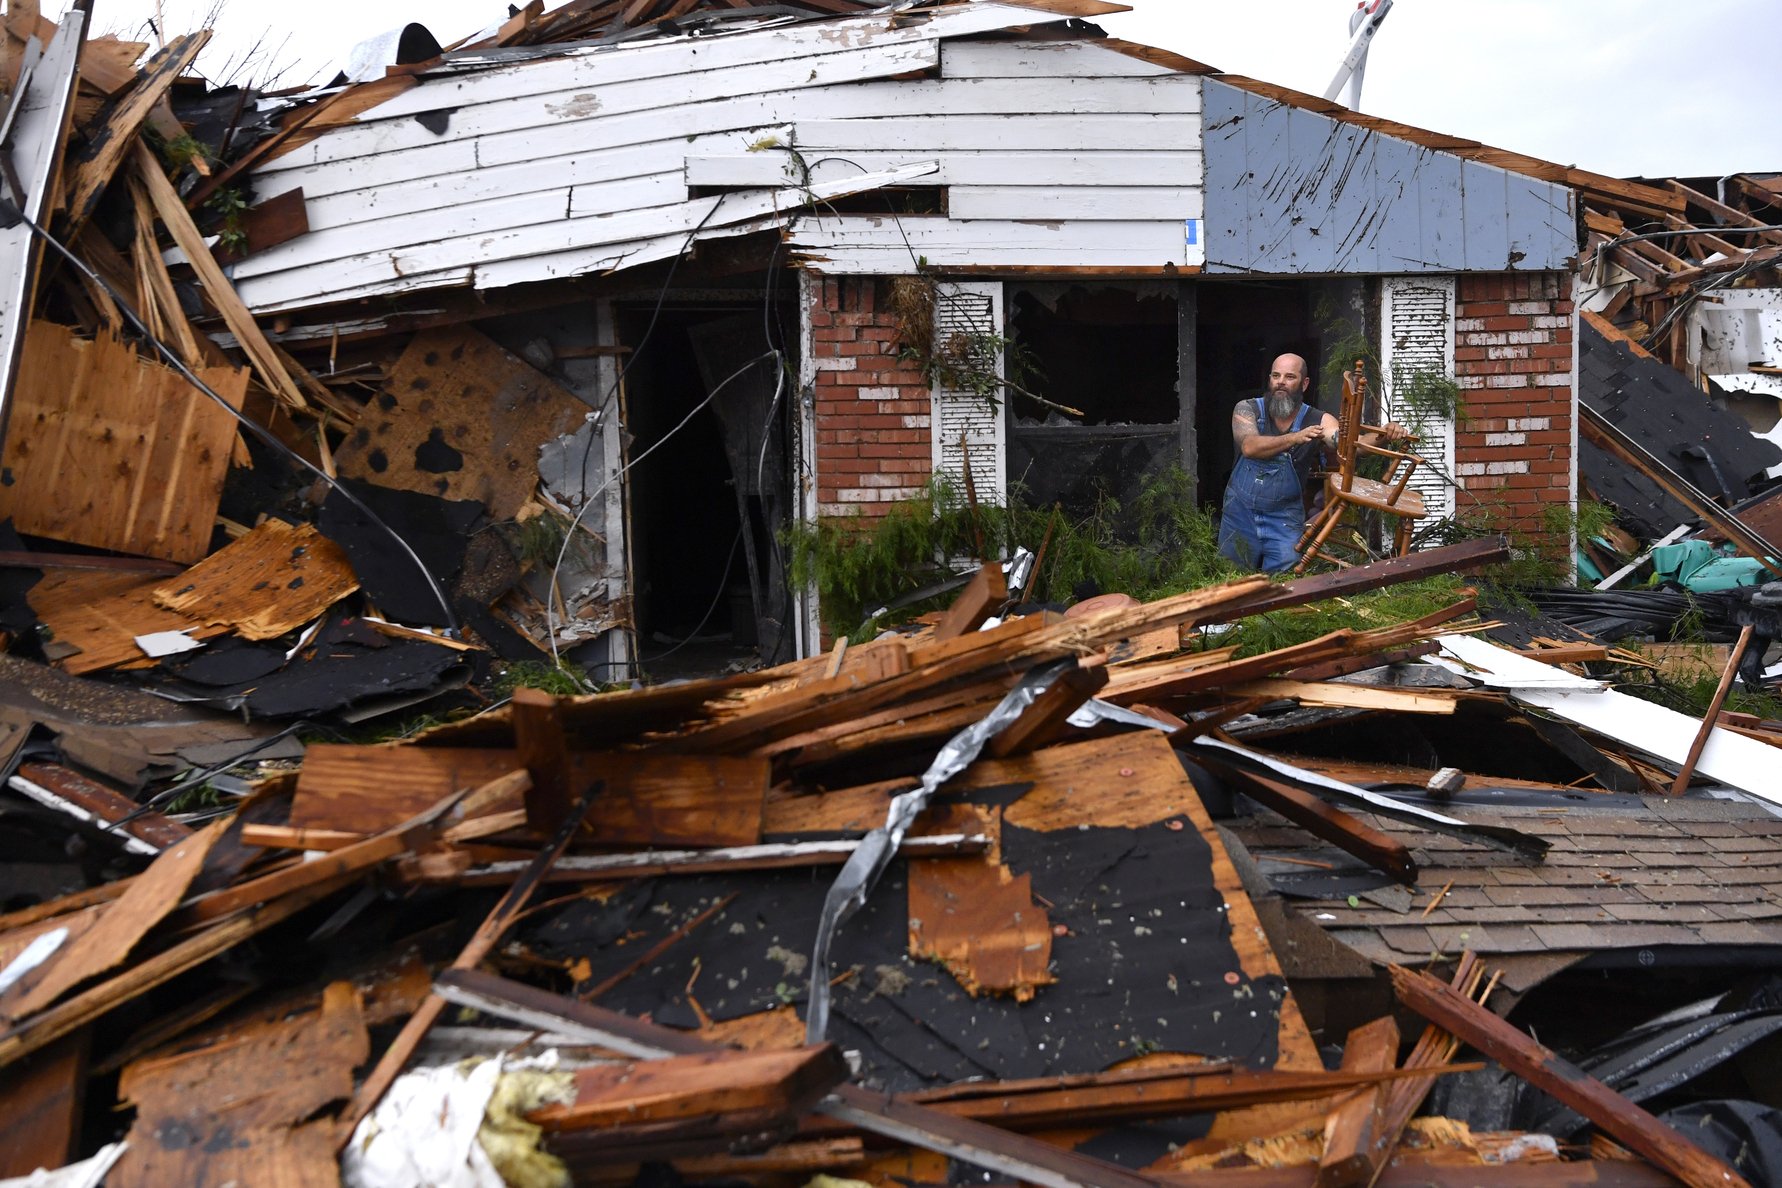 Tornadoes rake Southern Plains; more severe weather expected